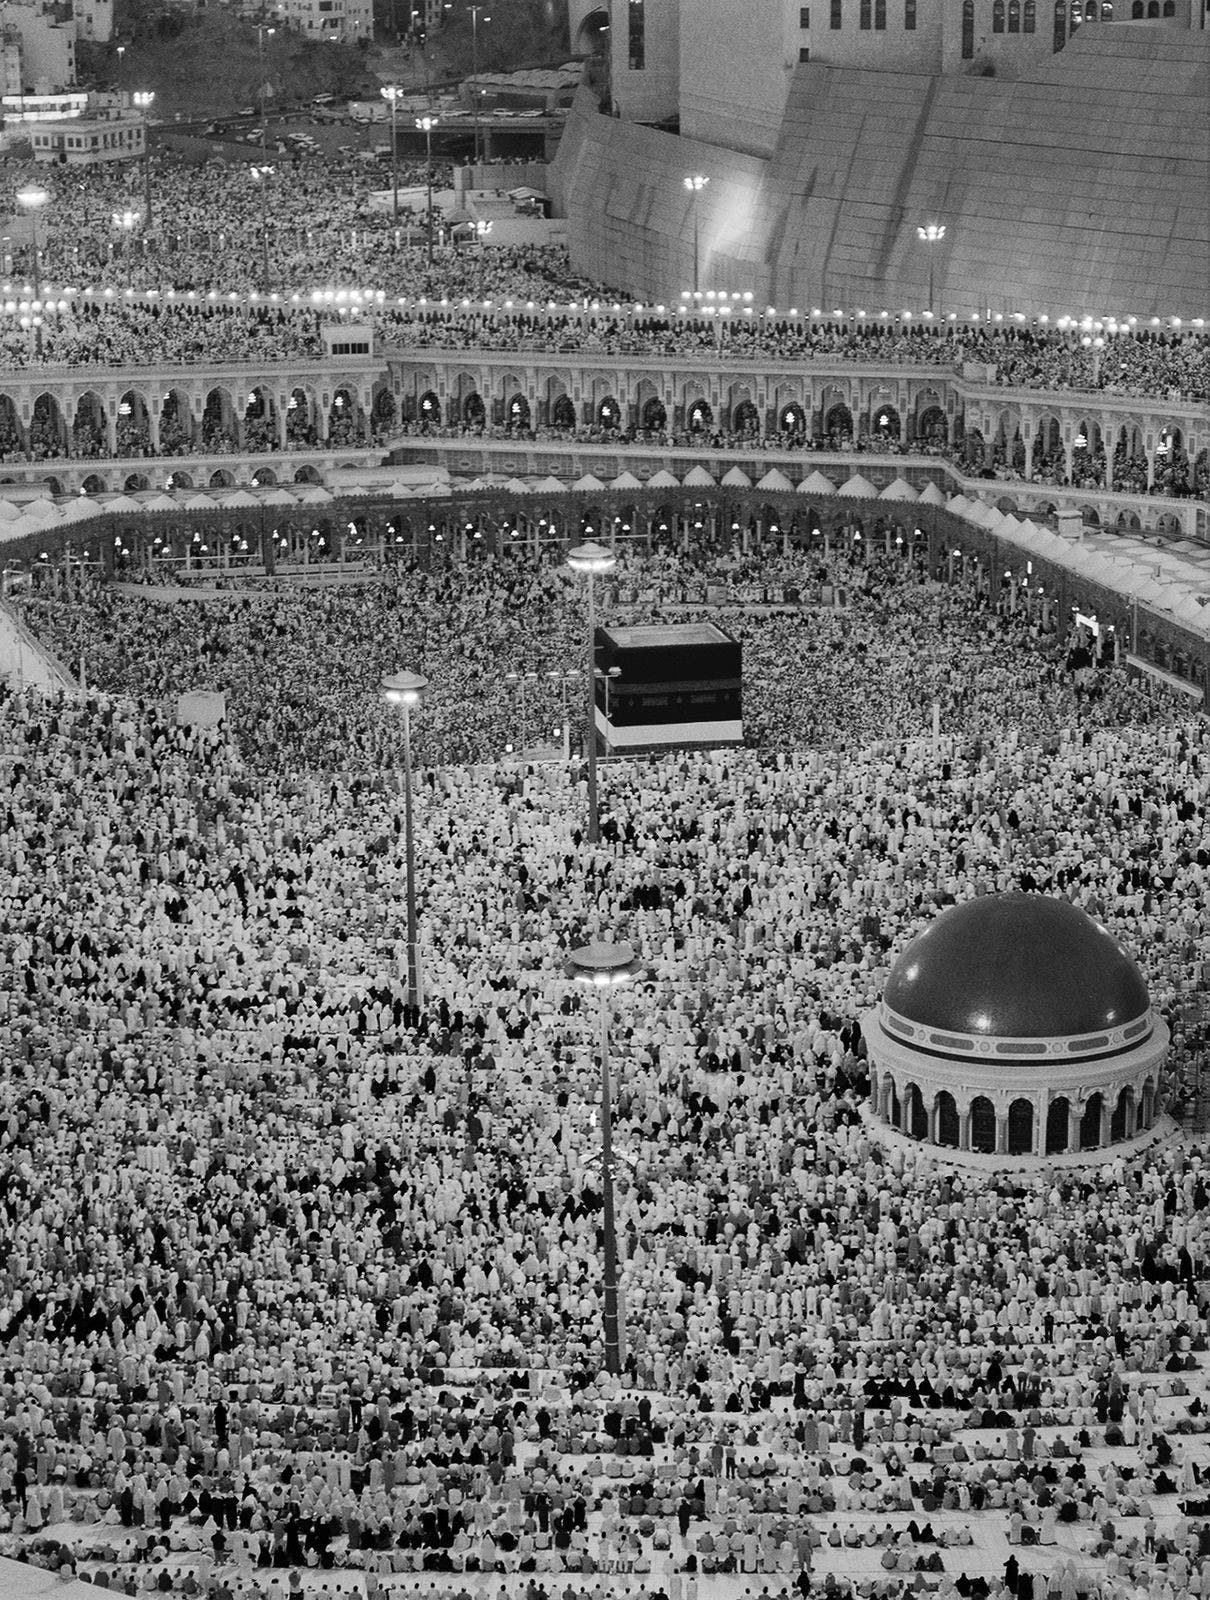 A photograph from Reem al-Faisal's historic series on the Hajj pilgrimage in Mecca, created between 1999 and 2003. (Supplied)